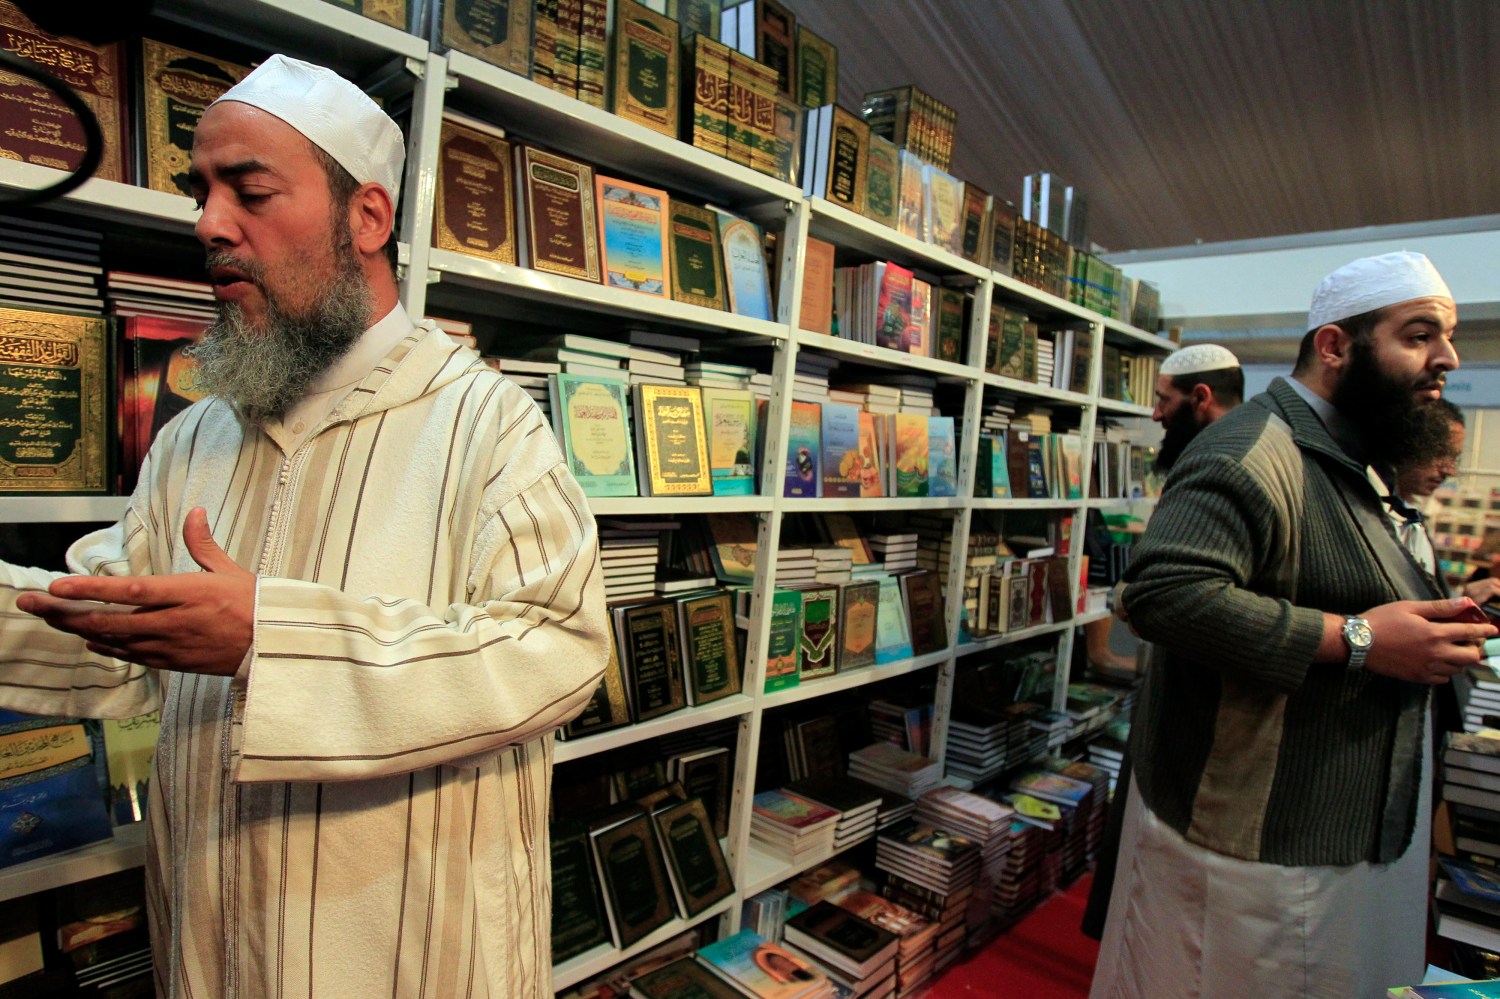 Sheikh Chemseddine Bouroubi (L), a well-known imam who follows a traditional Algerian school of Islam, reads a religious book at a Salafist stand during the 15th International Book Fair (SILA) in Algiers October 29, 2010. Algeria is cracking down on imports of books preaching the ultra-conservative Salafist branch of Islam, officials and industry insiders say, in a step aimed at reining in the ideology's growing influence. Salafism is a school of Islam that has its roots in Saudi Arabia and emphasises religious purity. Its followers reject the trappings of modern life, including music, Western styles of dress and taking part in politics. Picture taken October 29, 2010. To match Feature ALGERIA-RELIGION/BOOKS REUTERS/Zohra Bensemra (ALGERIA - Tags: EDUCATION SOCIETY RELIGION) - RTXV0GL